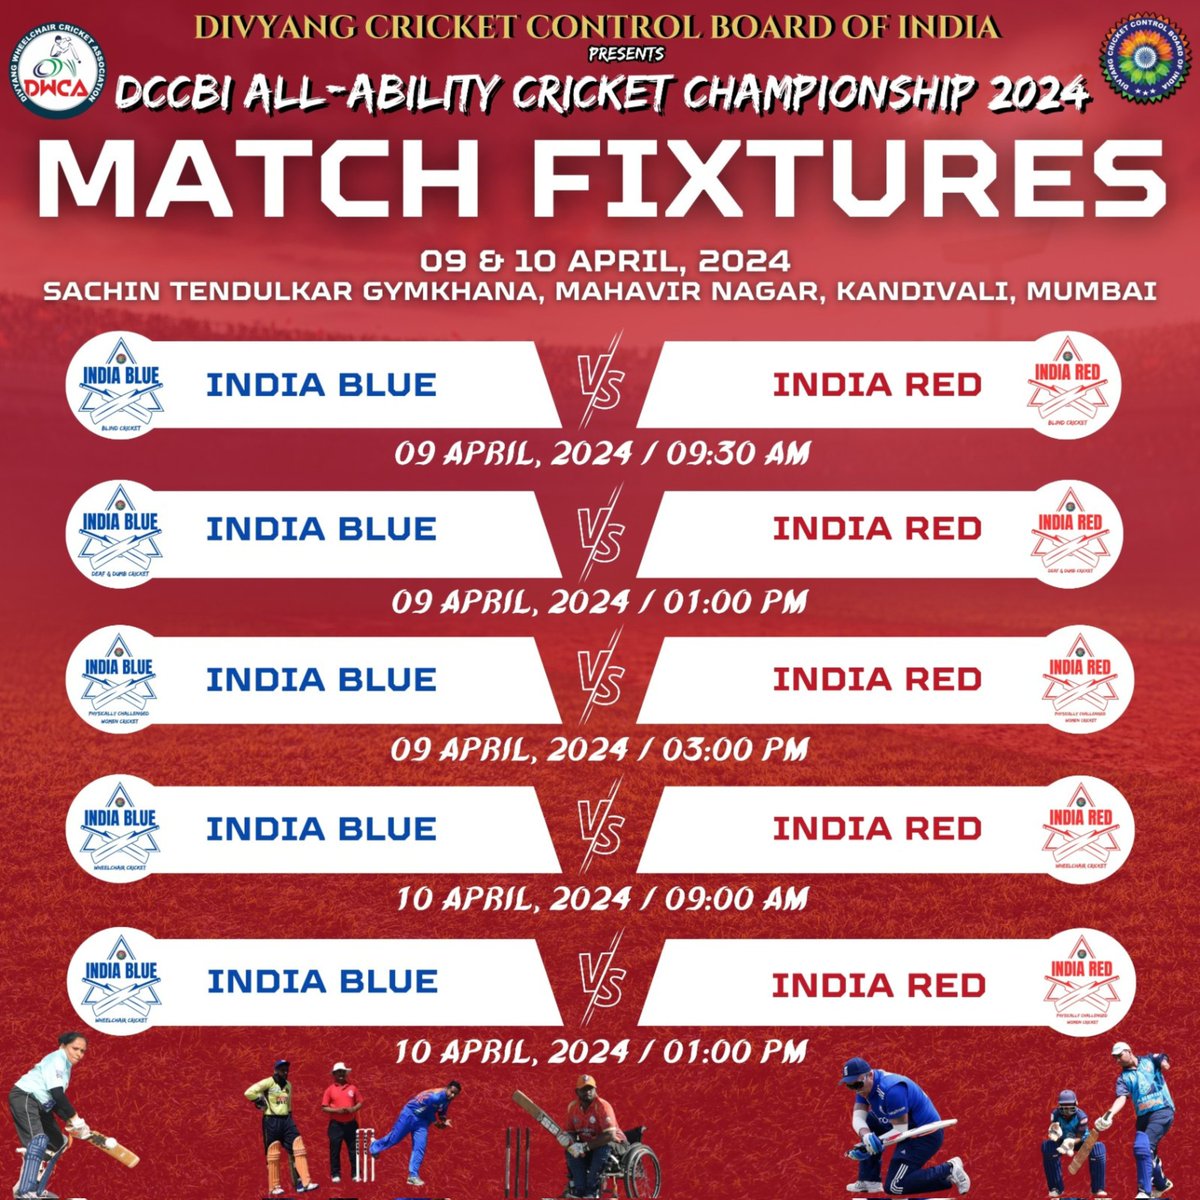 Get ready for #DCCBI #AllAbilitiesCricket Championship 2024 kicks off on April 9 & 10. 

Join us for thrilling matches of #BlindCricket, #PhysicallyChallengedCricket, #WheelchairCricket, #DeafCricket, and #PhysicallyChallenged #WomenCricket.

#AllAbilitiesCricket #CricketForAll